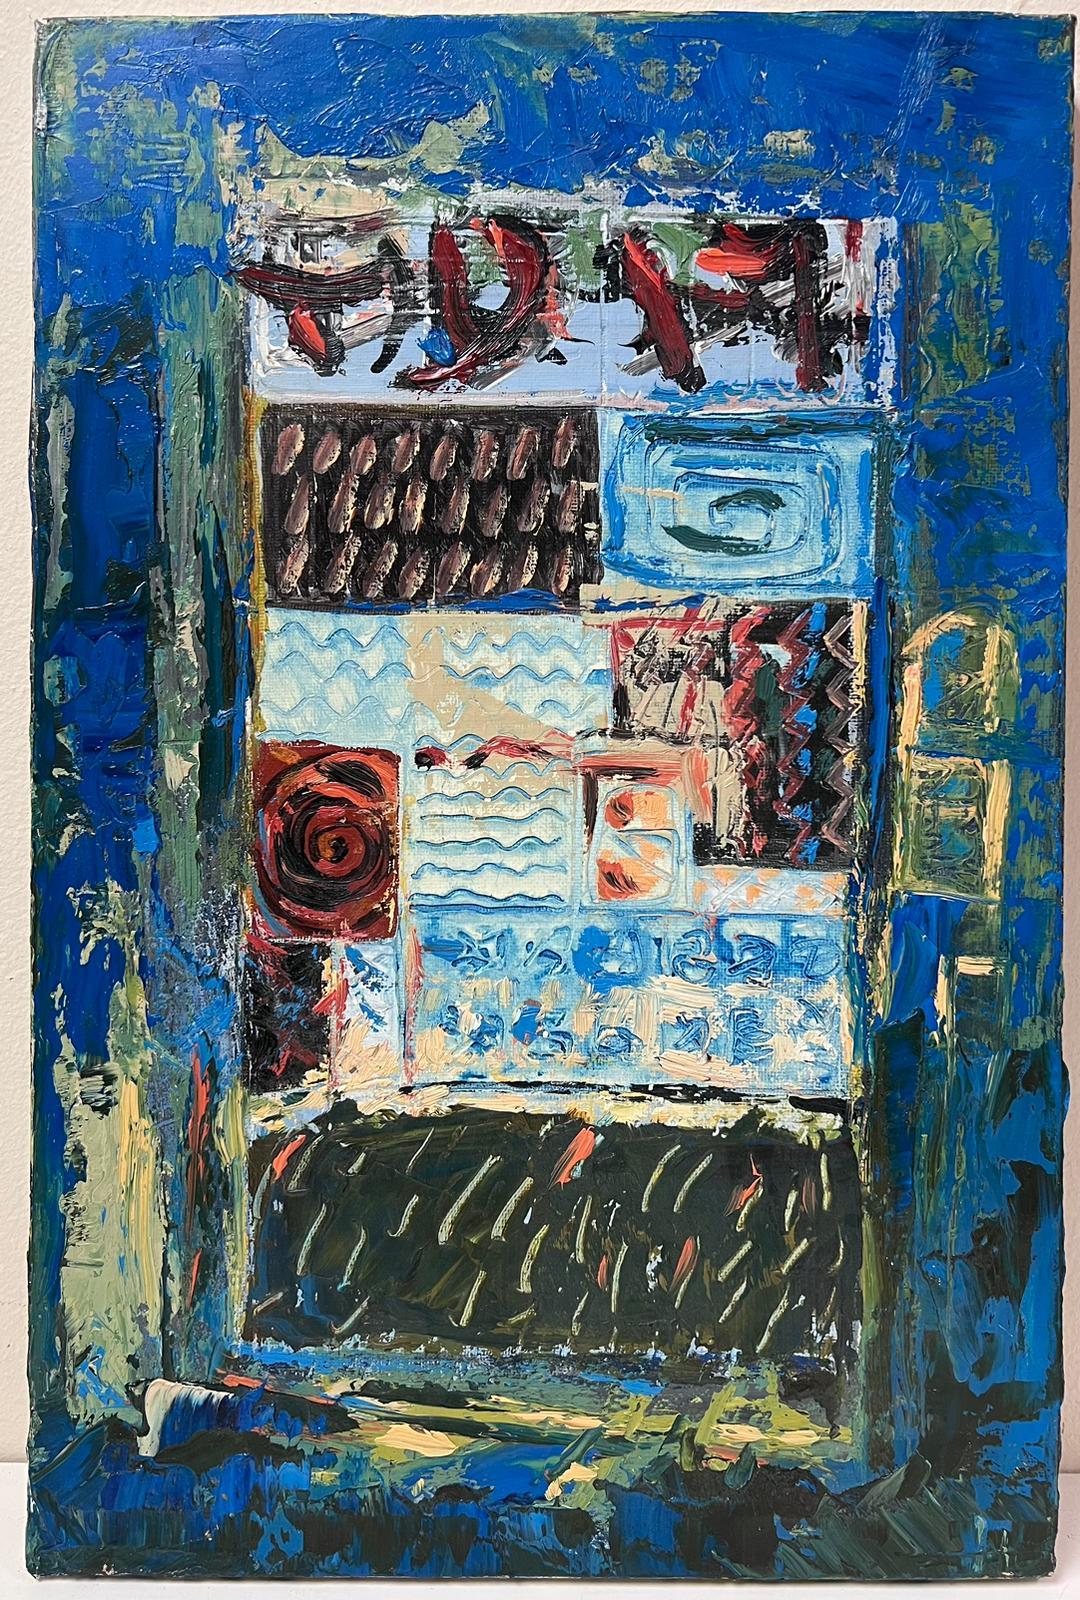 Abstract Expressionist Composition
by Jacques COULAIS (1955-2011)
oil painting on canvas
unframed: 16 x 11 inches
condition: excellent
provenance: all the paintings we have for sale by this artist have come from the artists studio and are all